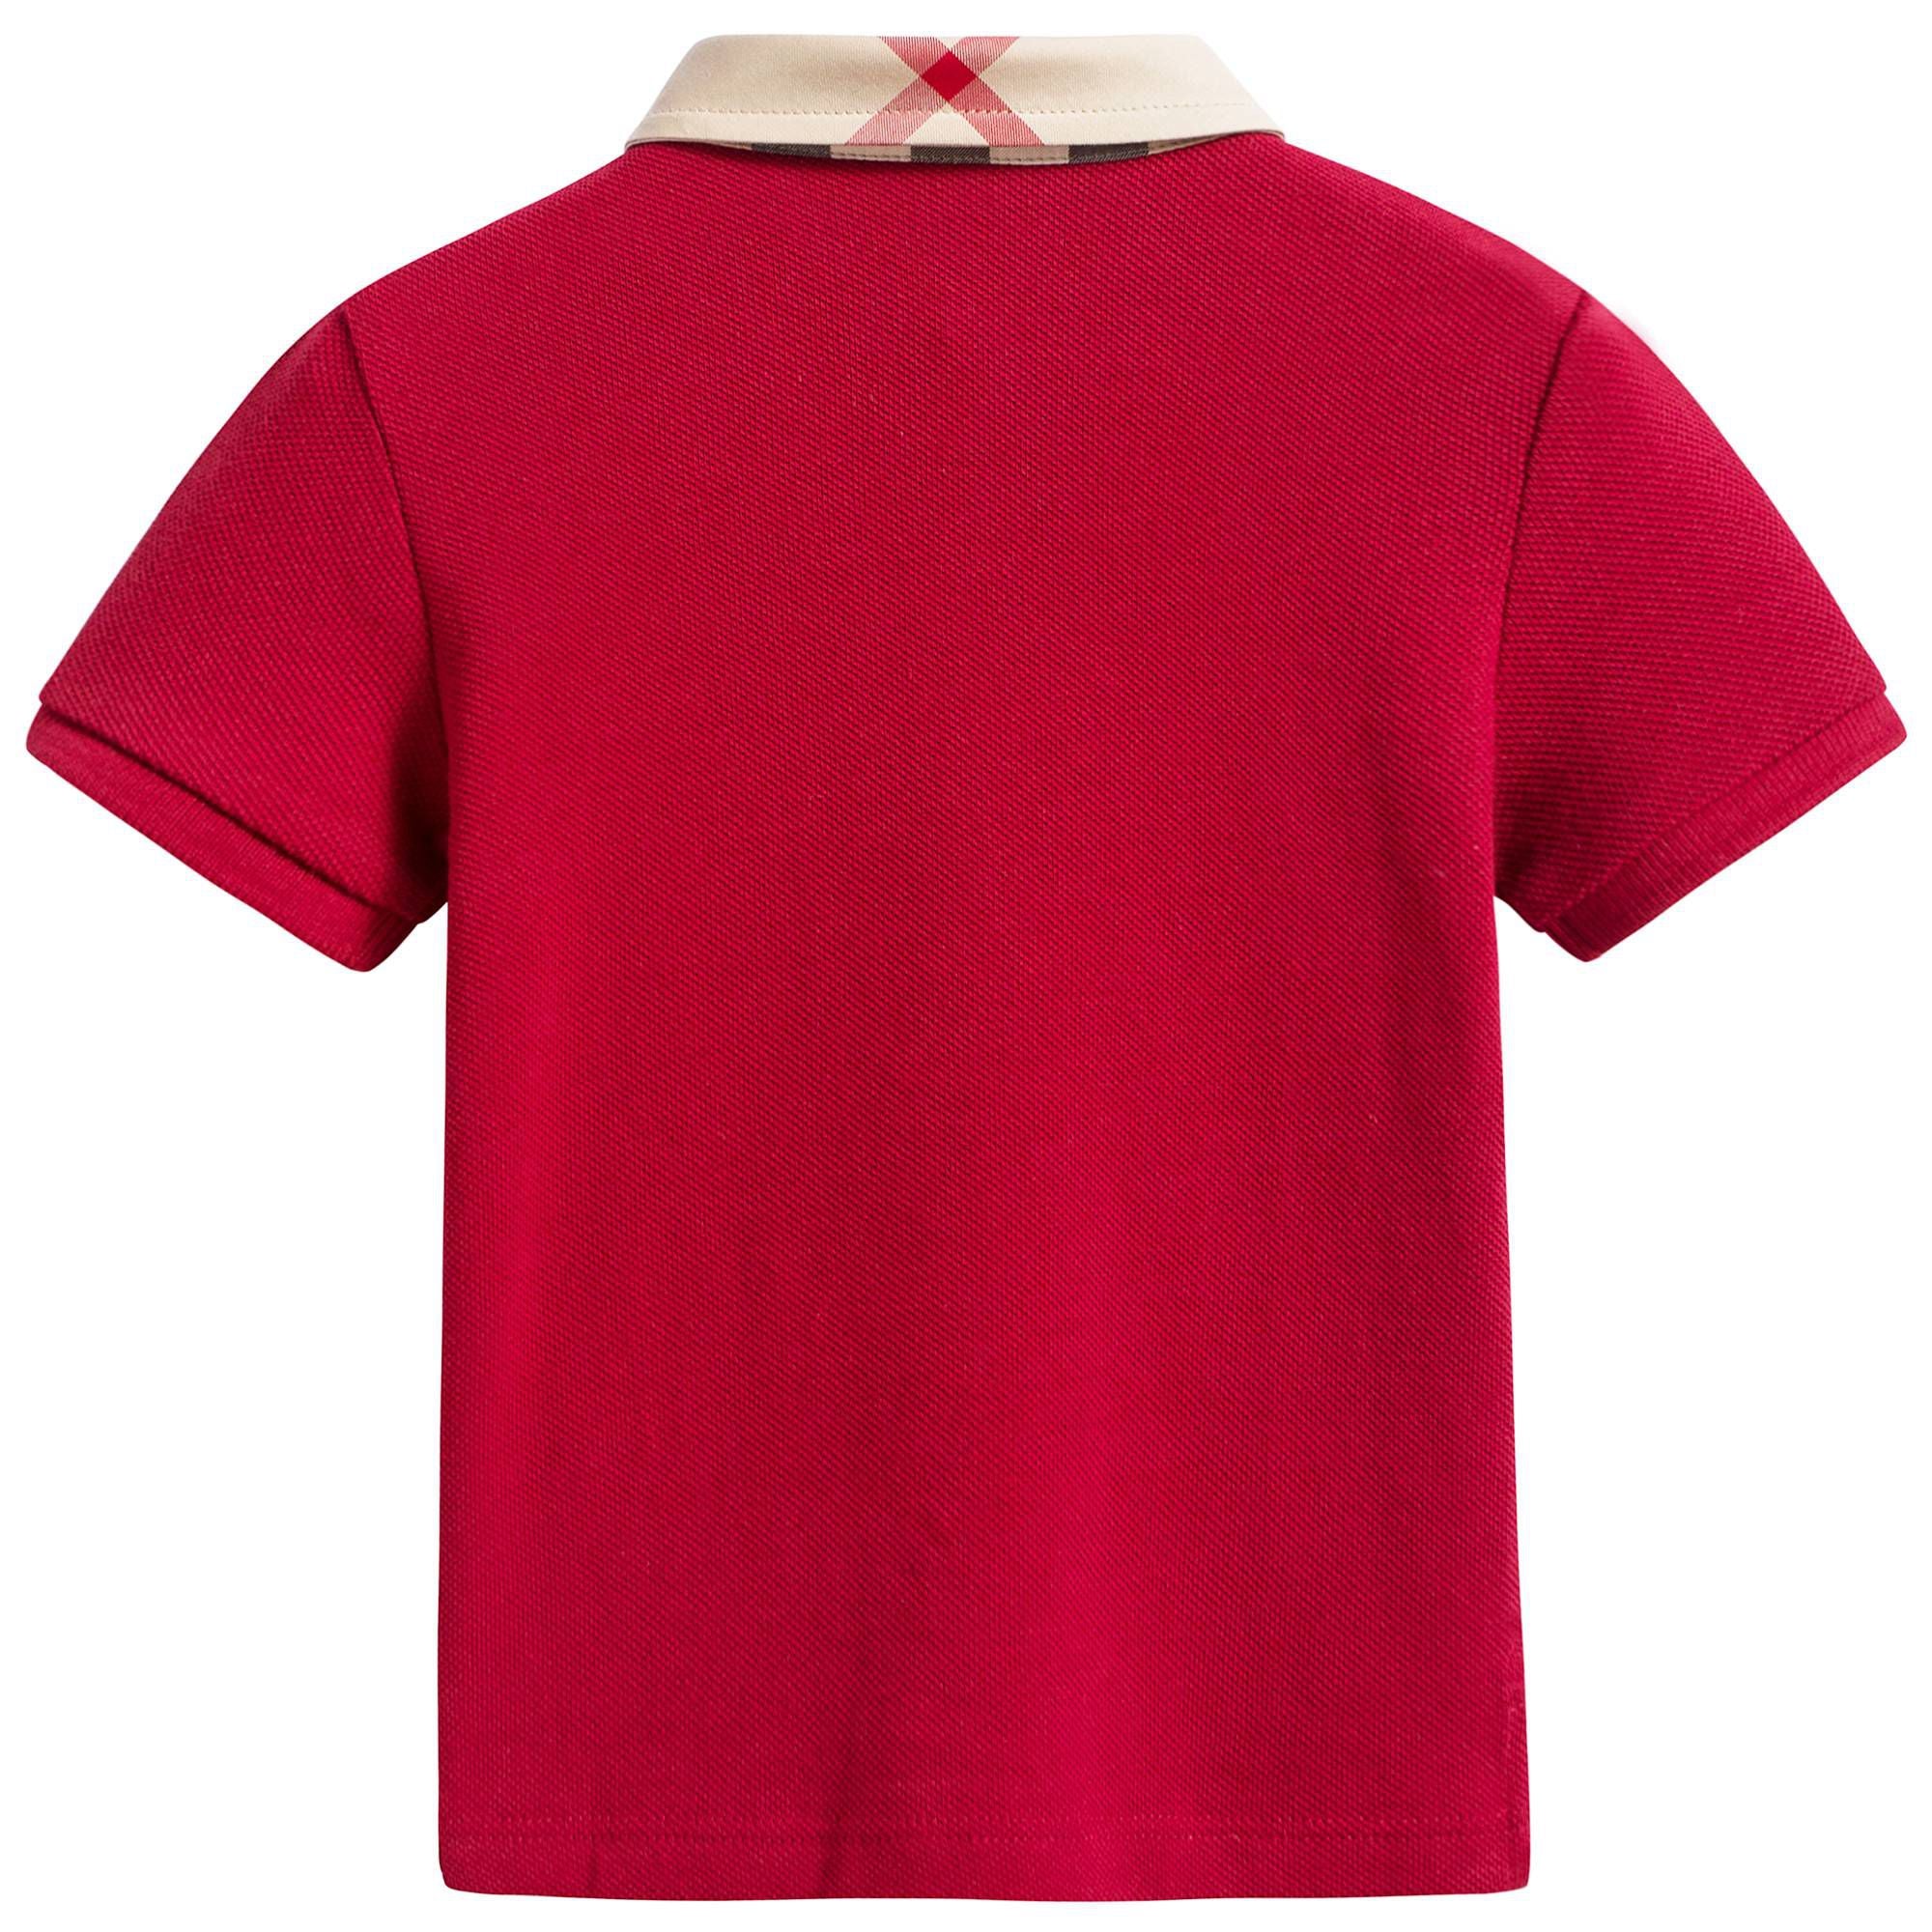 Boys Military Red Cotton Polo Shirts